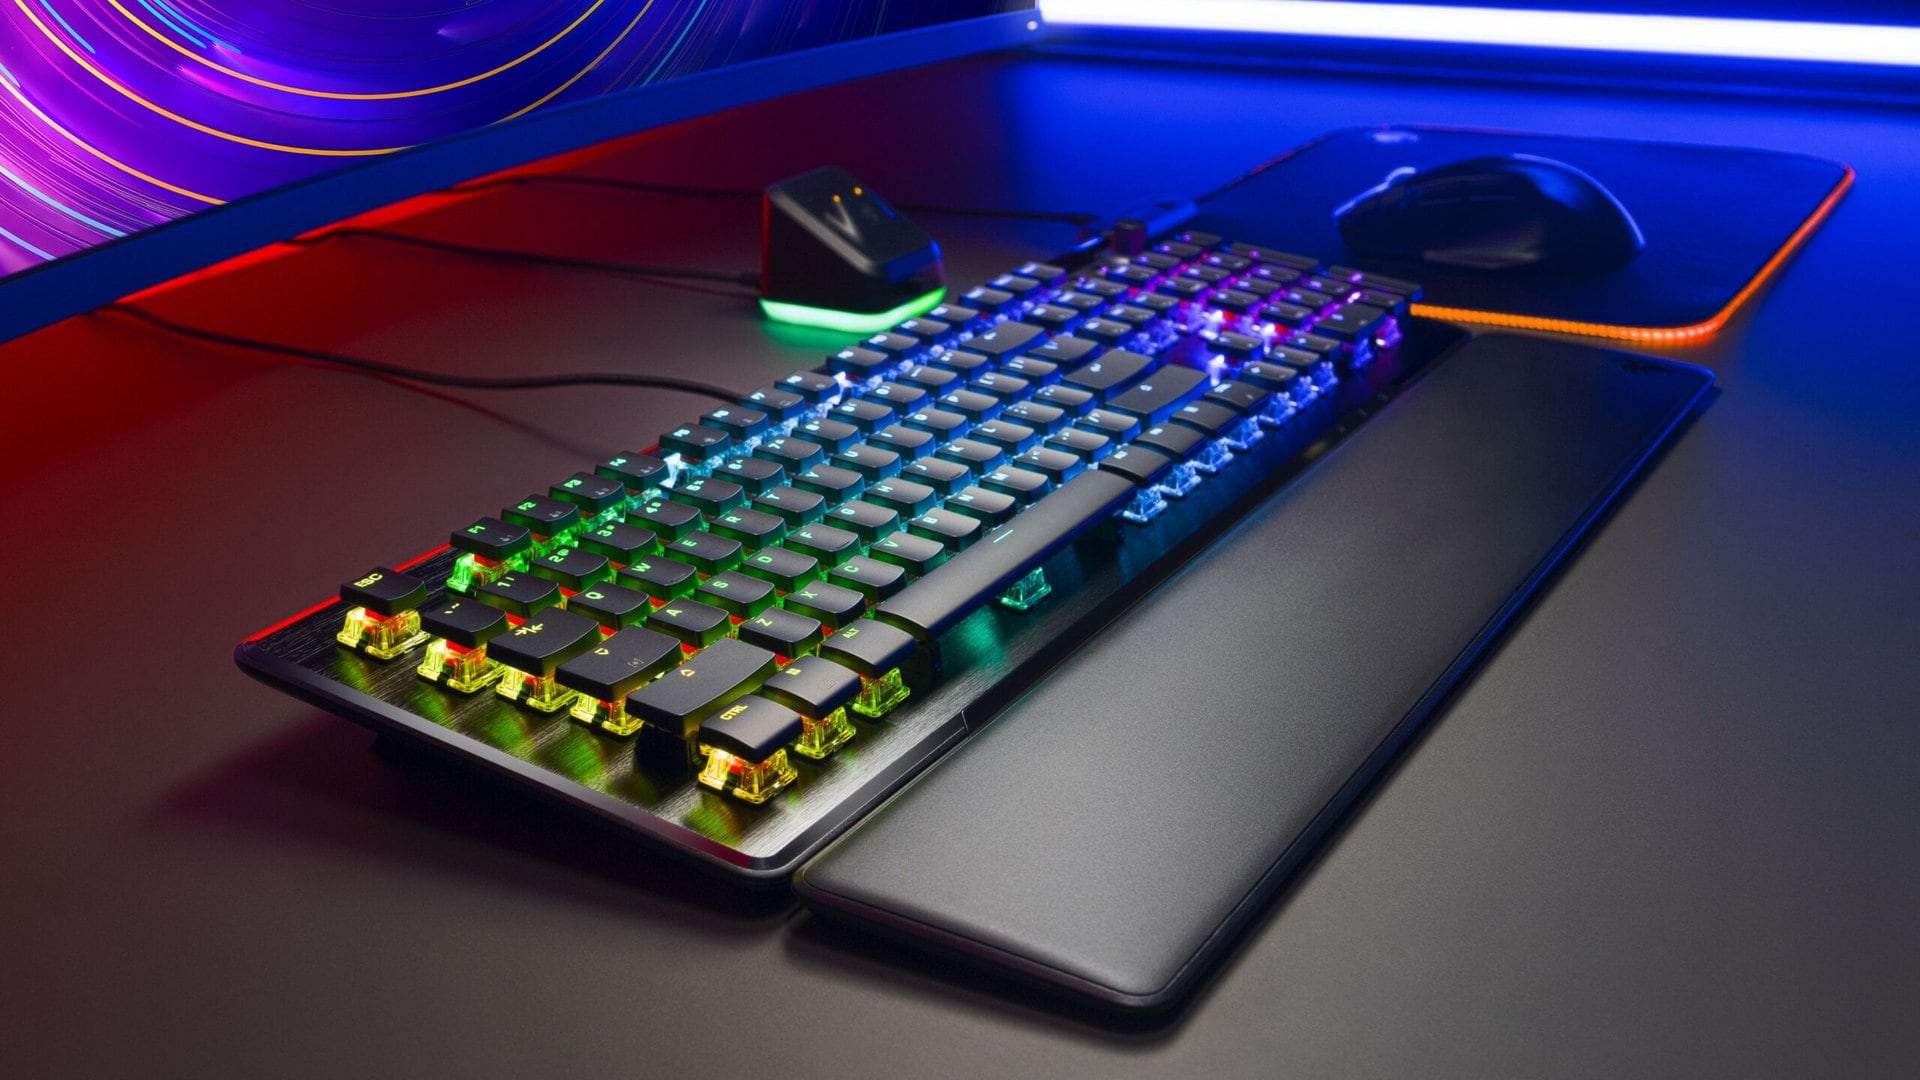 Vulcan II Mini Air and Vulcan II: New gaming keyboards are now available from ROCCAT